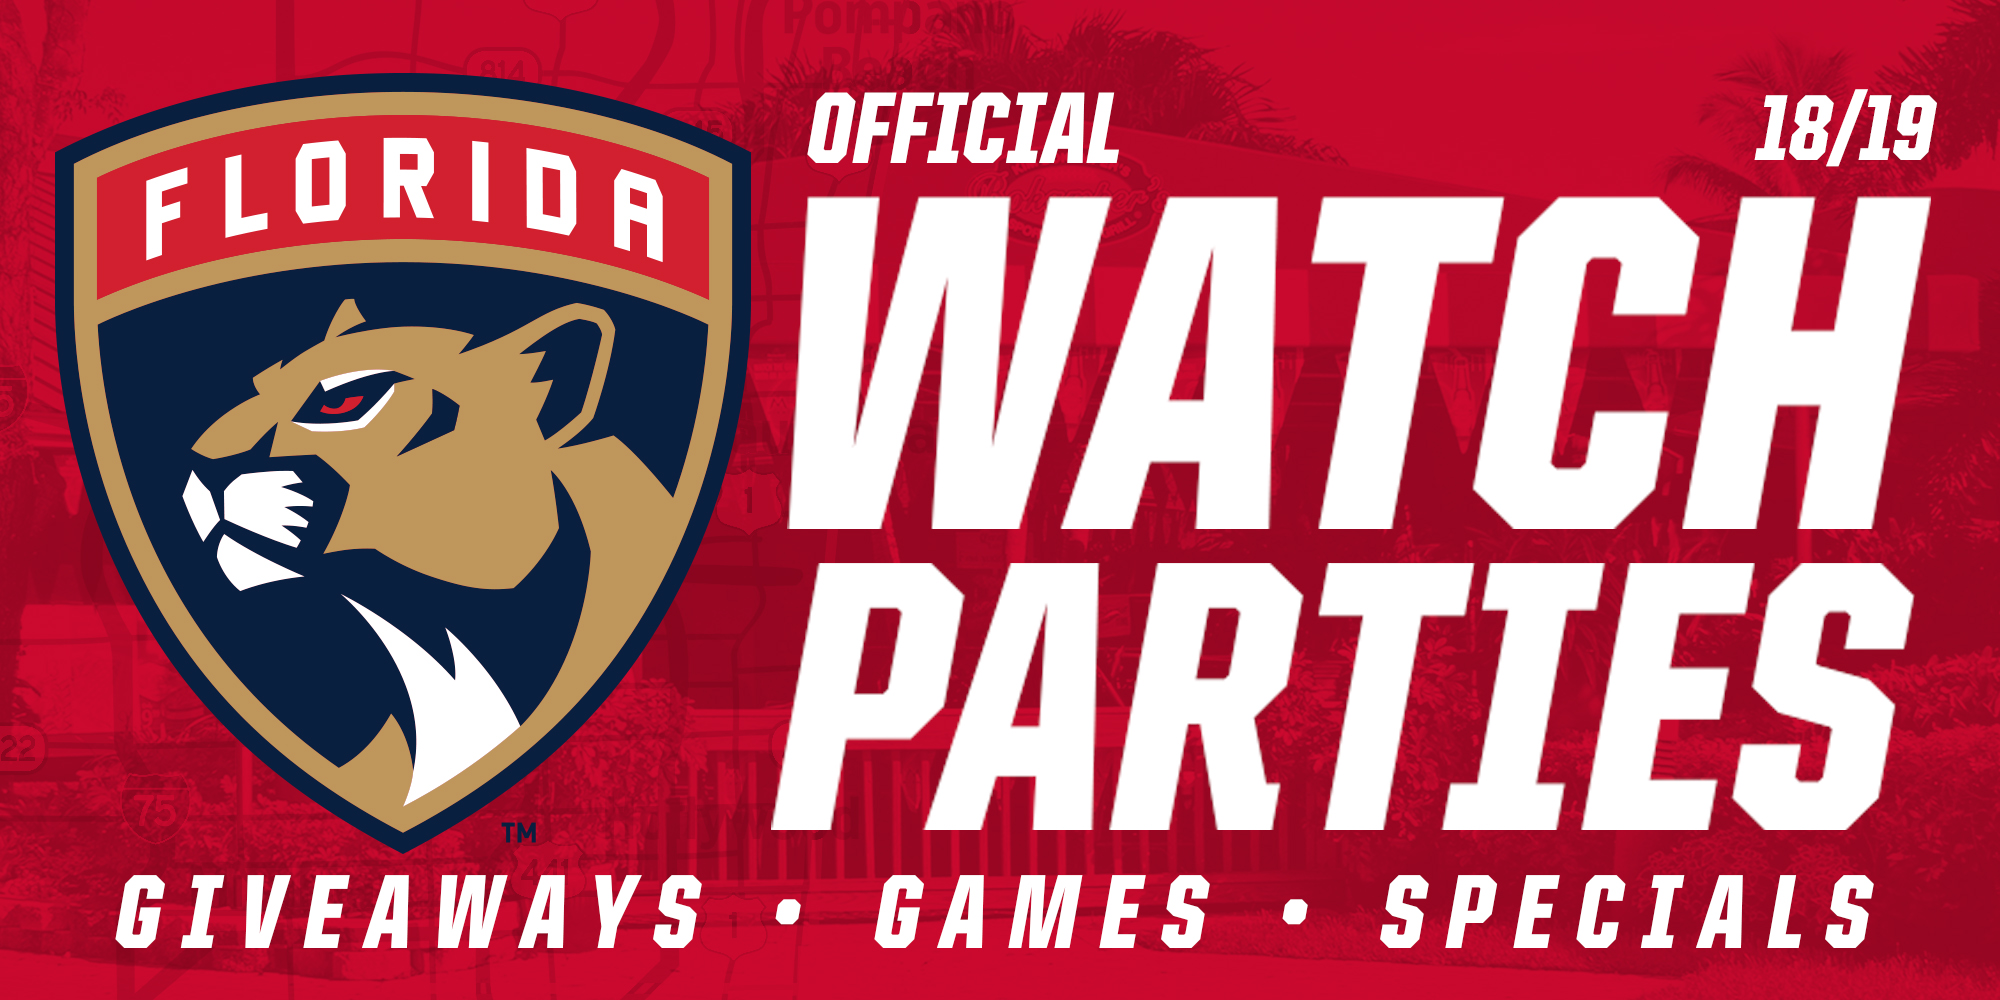 Florida Panthers Official Watch Parties image